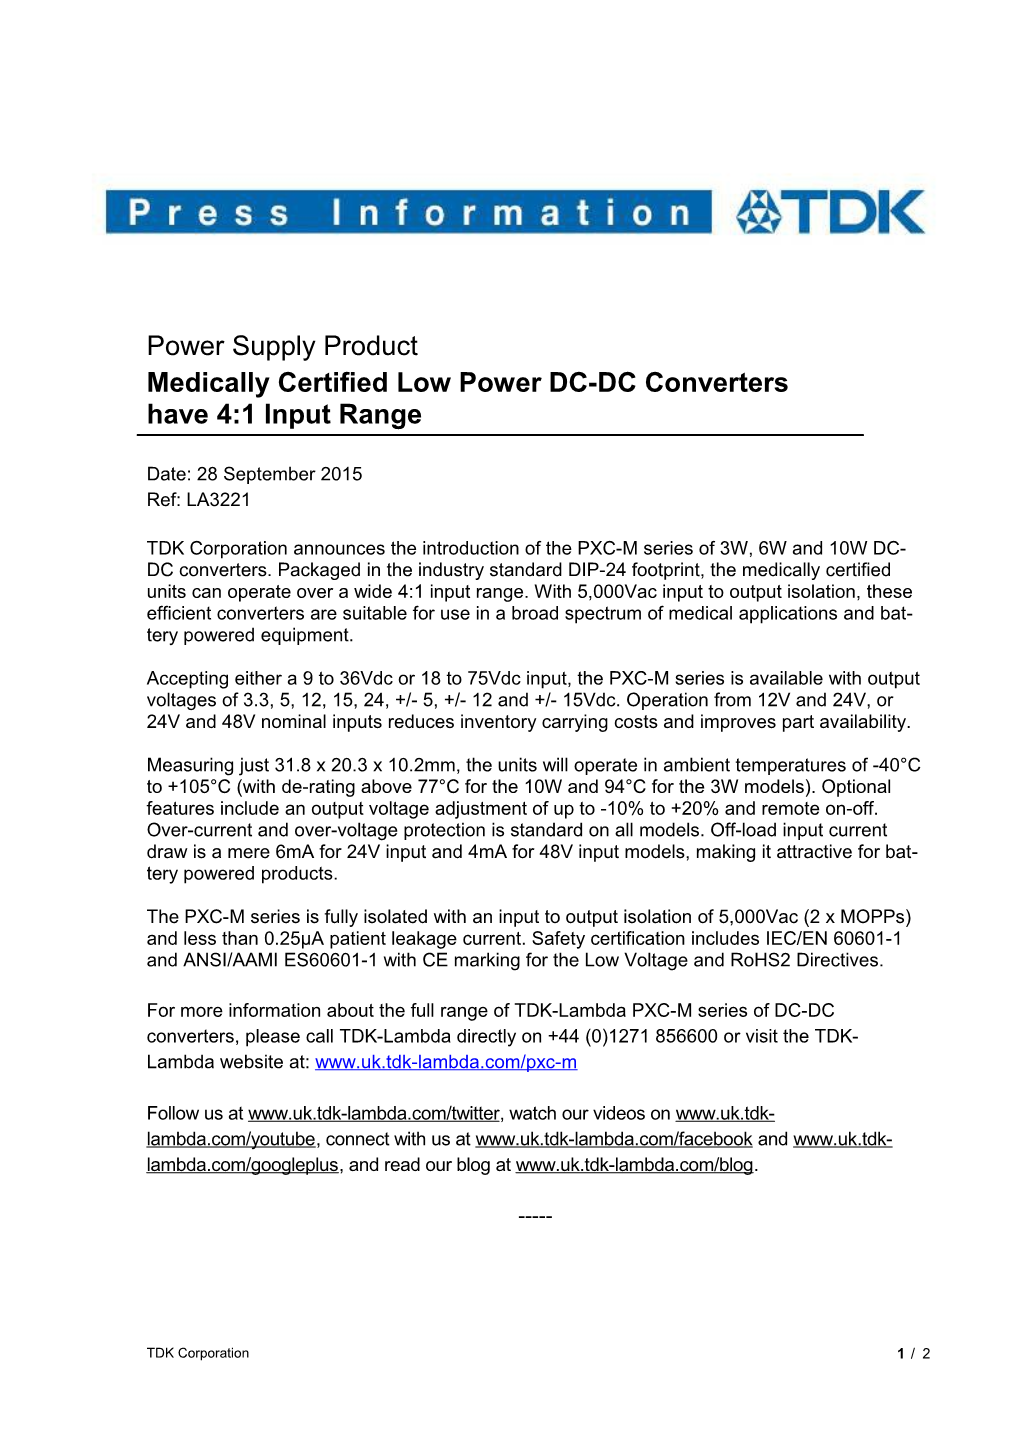 TDK Corporation Announces the Introduction of the PXC-M Series of 3W, 6W and 10W DC-DC